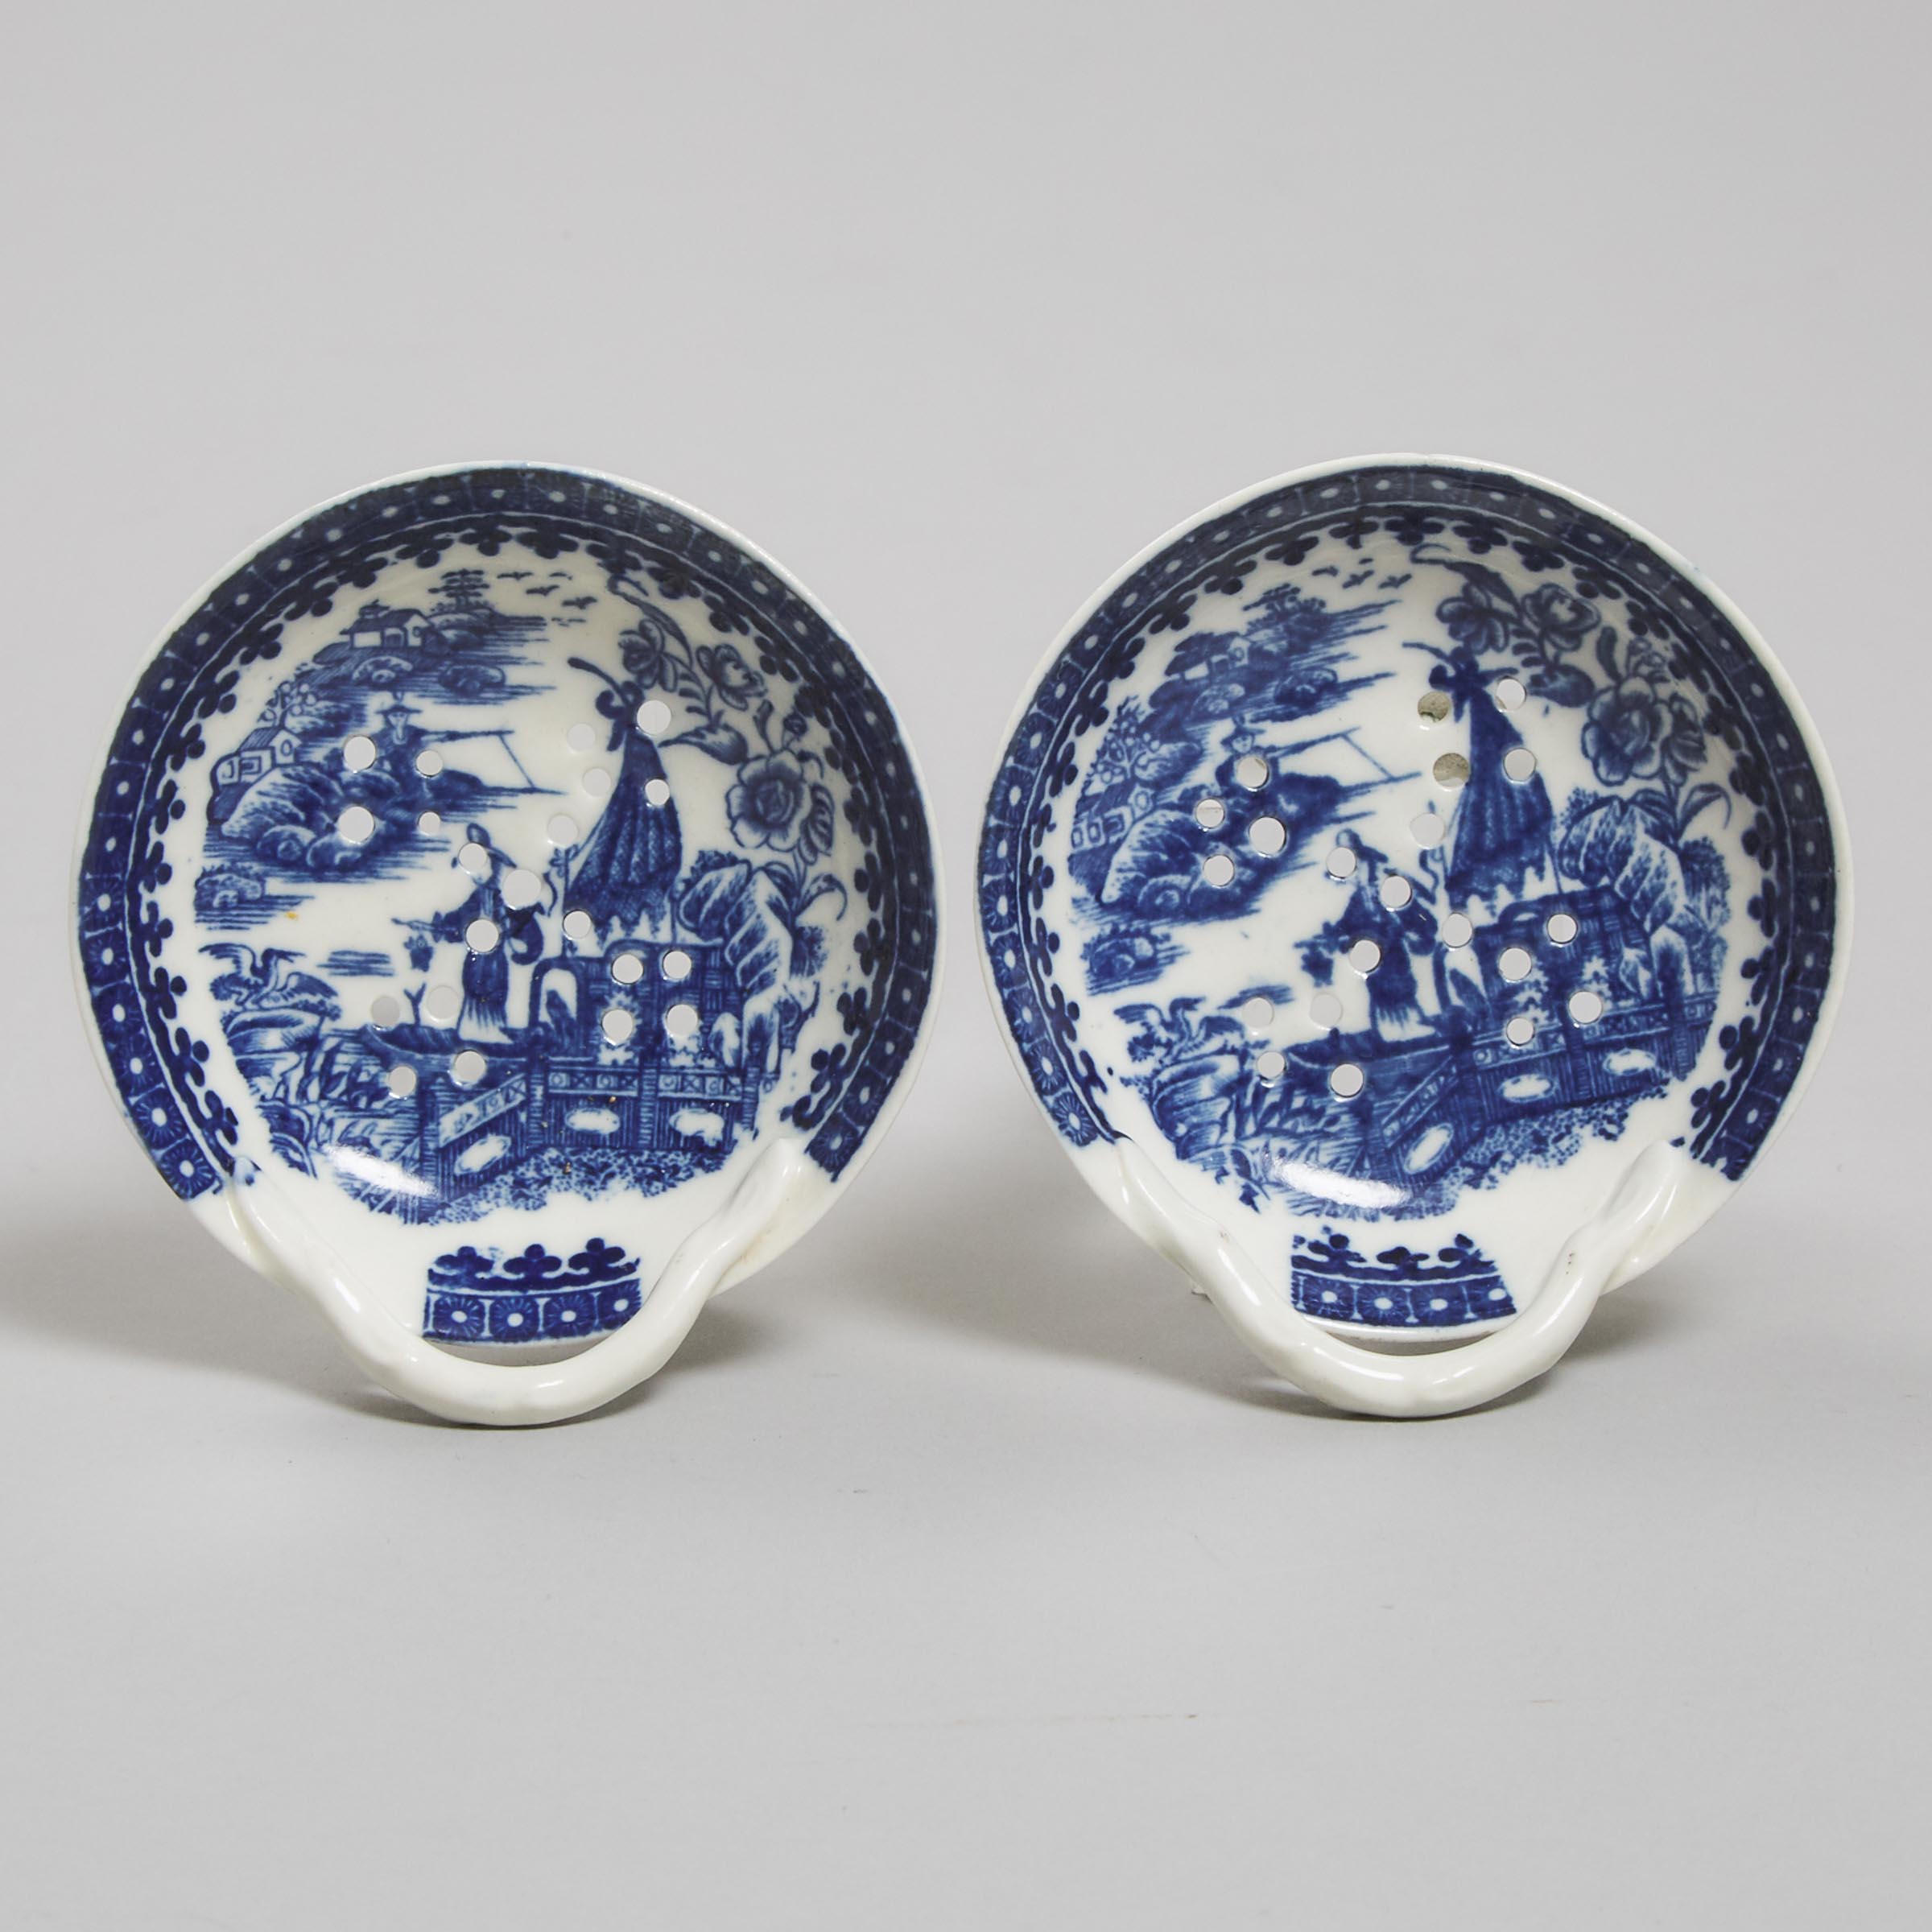 Pair of Caughley 'Fisherman' Pattern Egg Drainers, c.1785